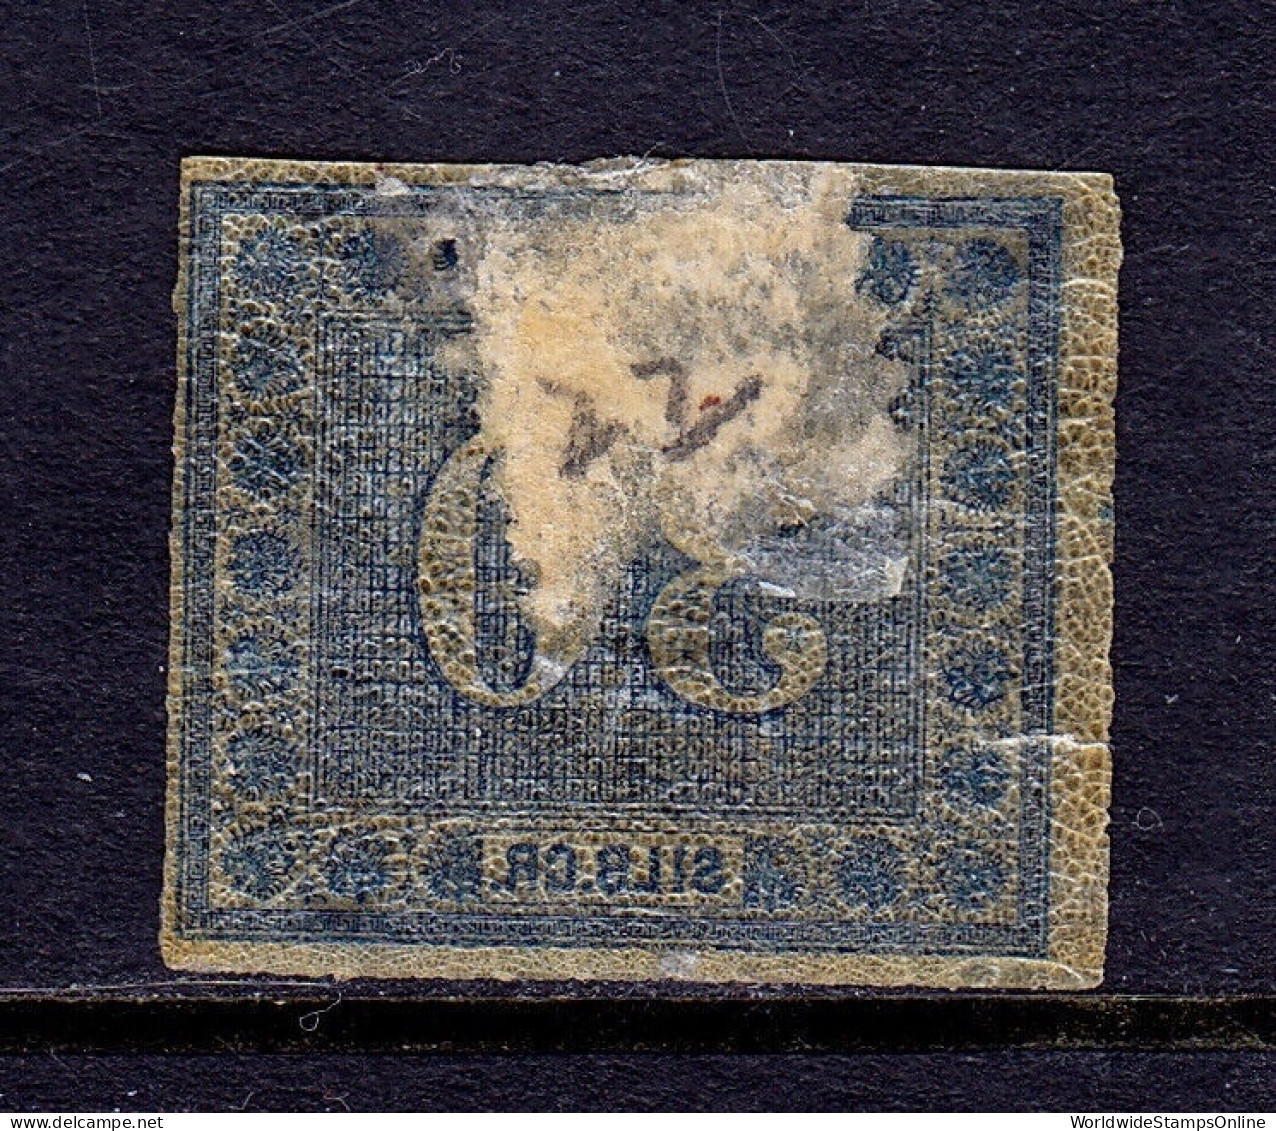 GERMANY (PRUSSIA) — SCOTT 22 — 1866 30sg BLUE NUMERAL — MH — SCV $110 - Mint